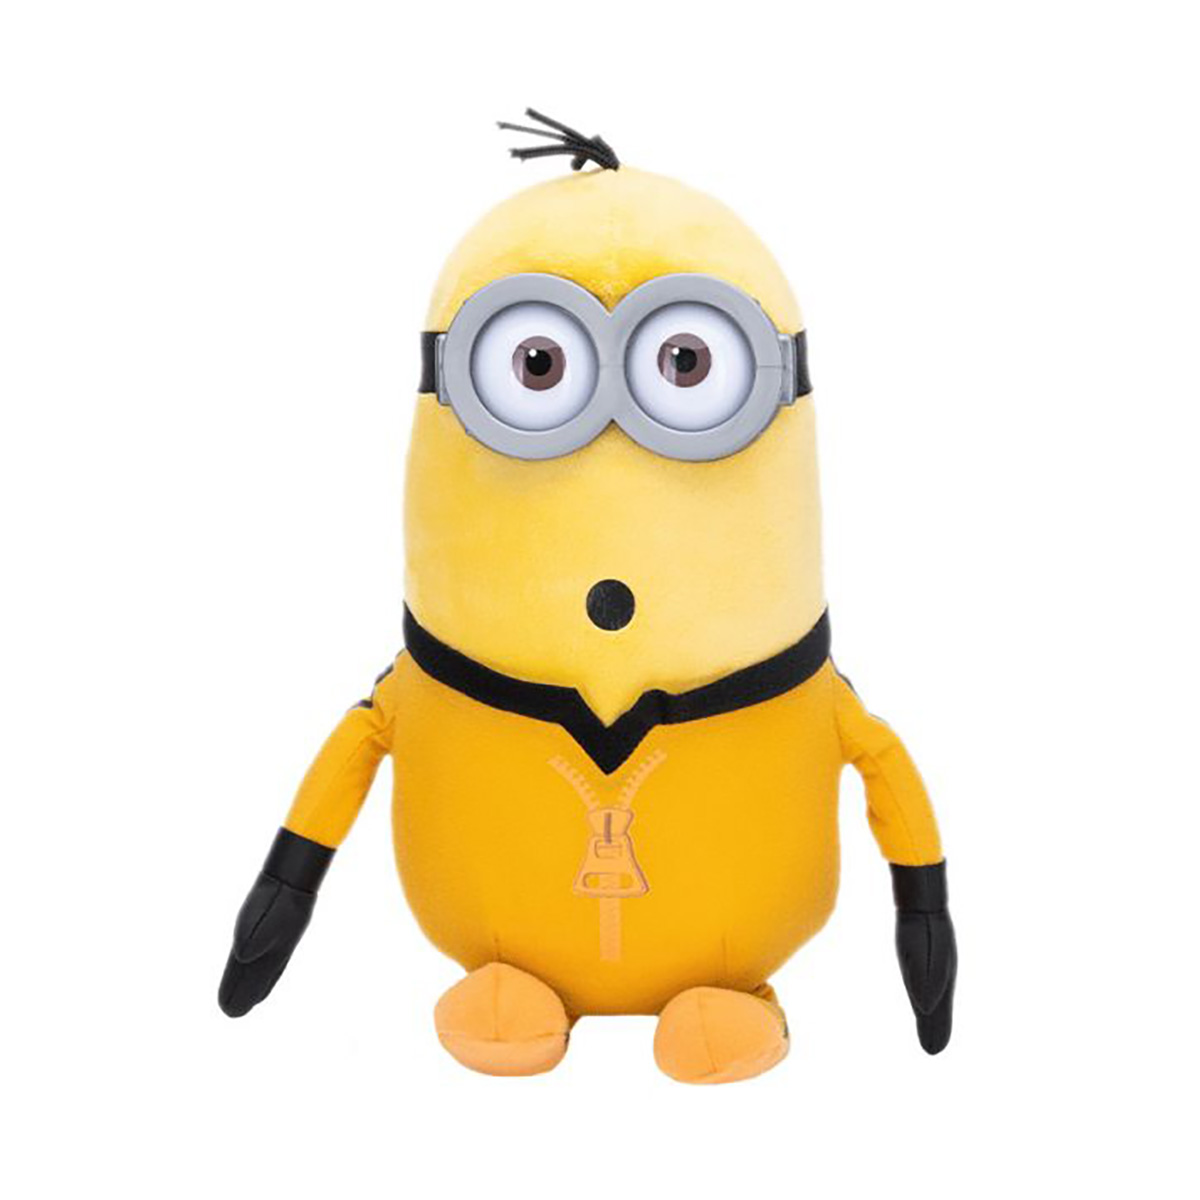 Jucarie din plus Kevin Kung Fu, Minions, Play by Play, 30 cm din imagine noua responsabilitatesociala.ro